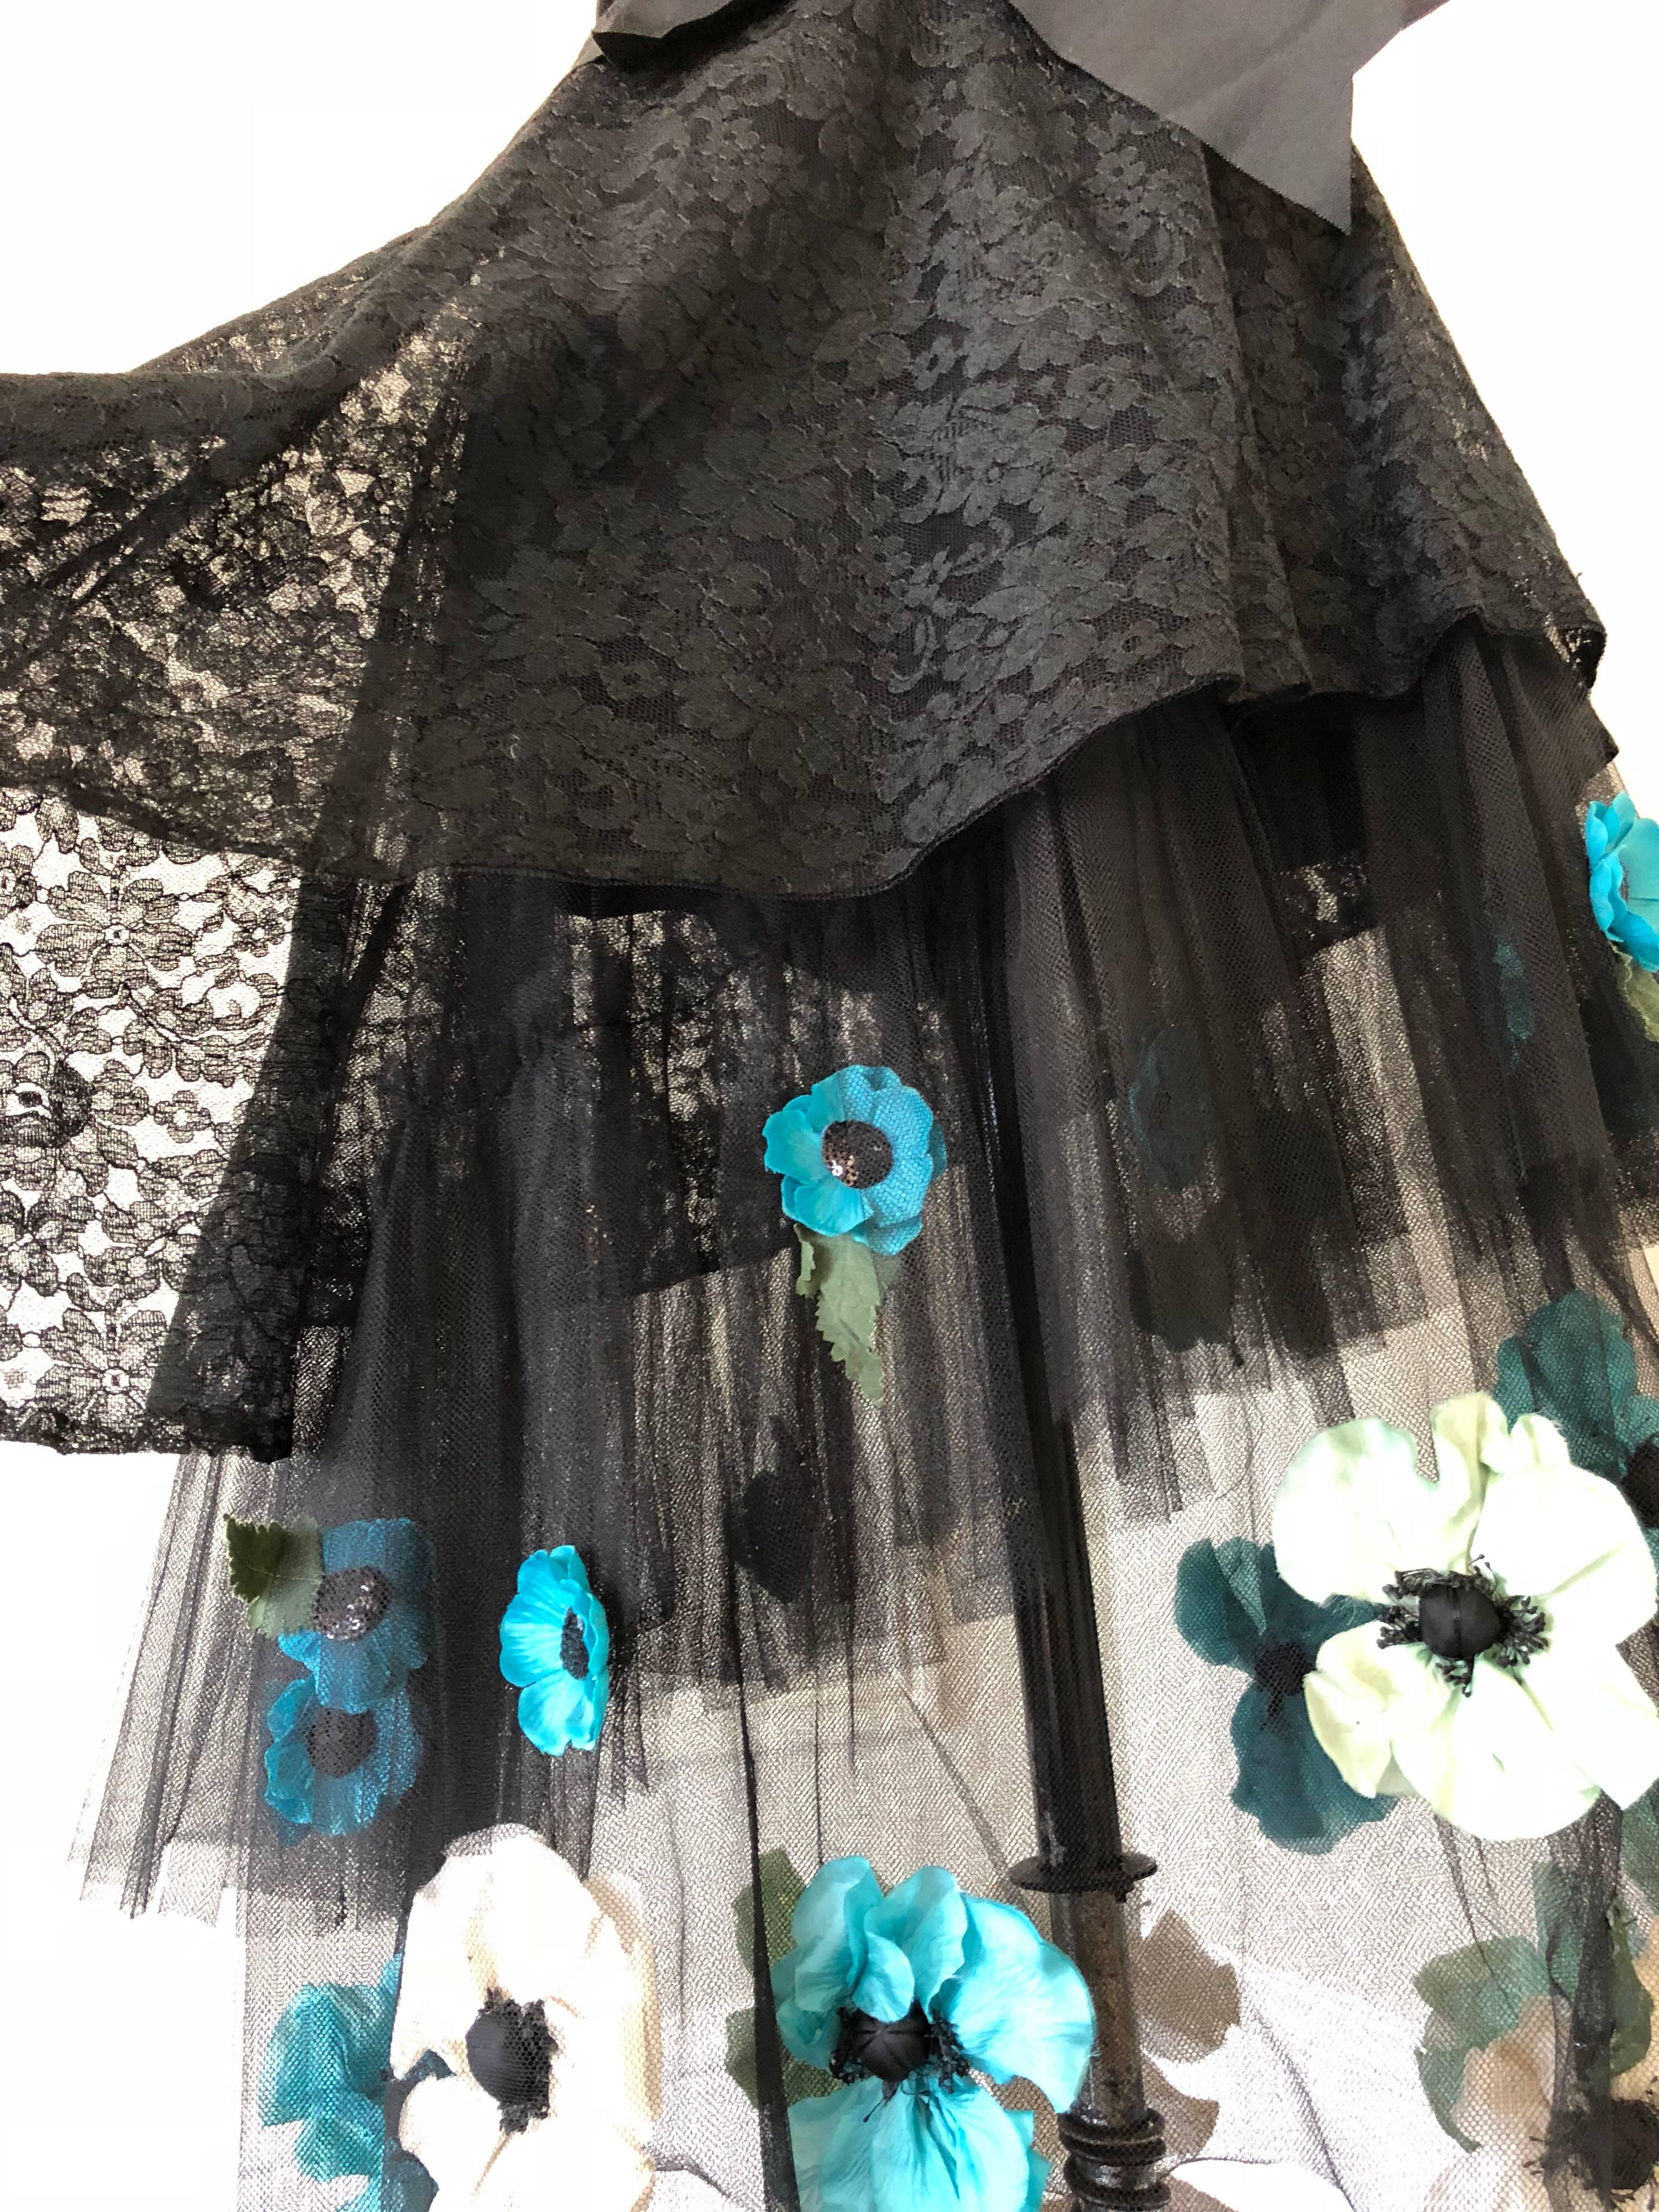 A 1950s style black lace and tulle skirt ensemble features a wonderful color combination of silk flowers arranged throughout the assymetrical skirt hemline. The large grosgrain ribbon wraps around the waist forming a bow tie. Coordinating black